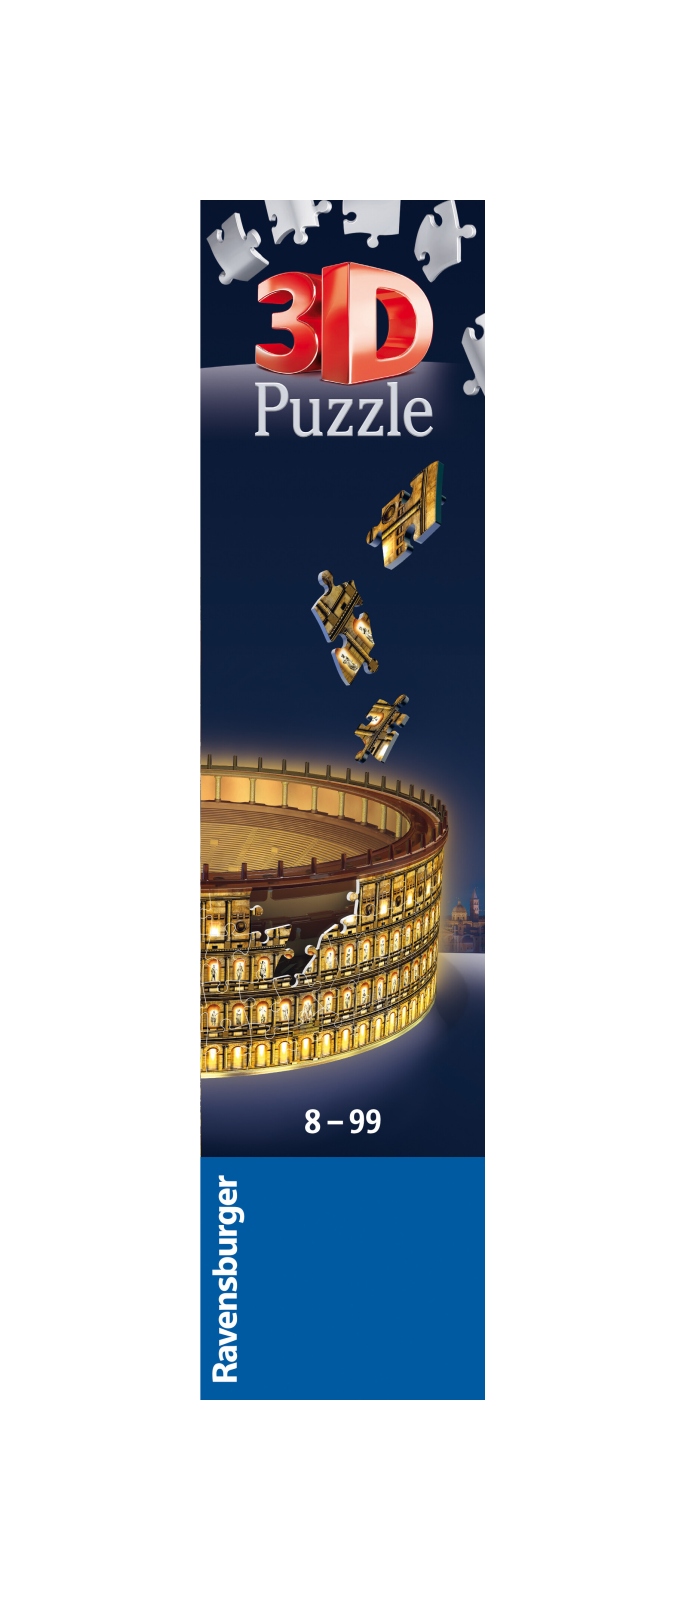 Ravensburger - 3D Puzzle Colosseo Night Edition con Luce, Roma